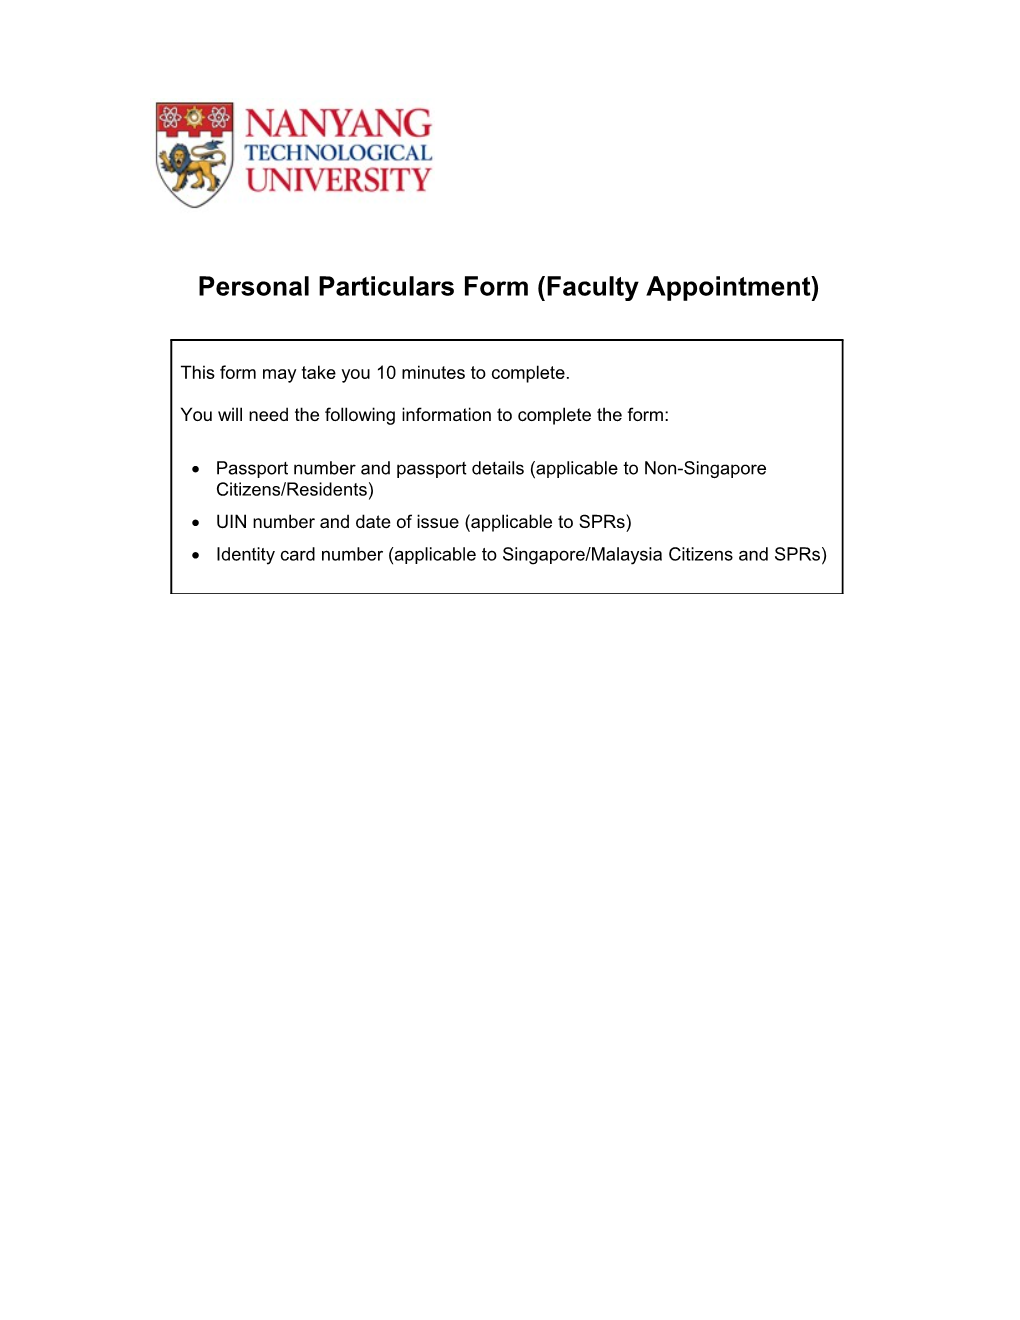 Personal Particulars Form (Faculty Appointment)